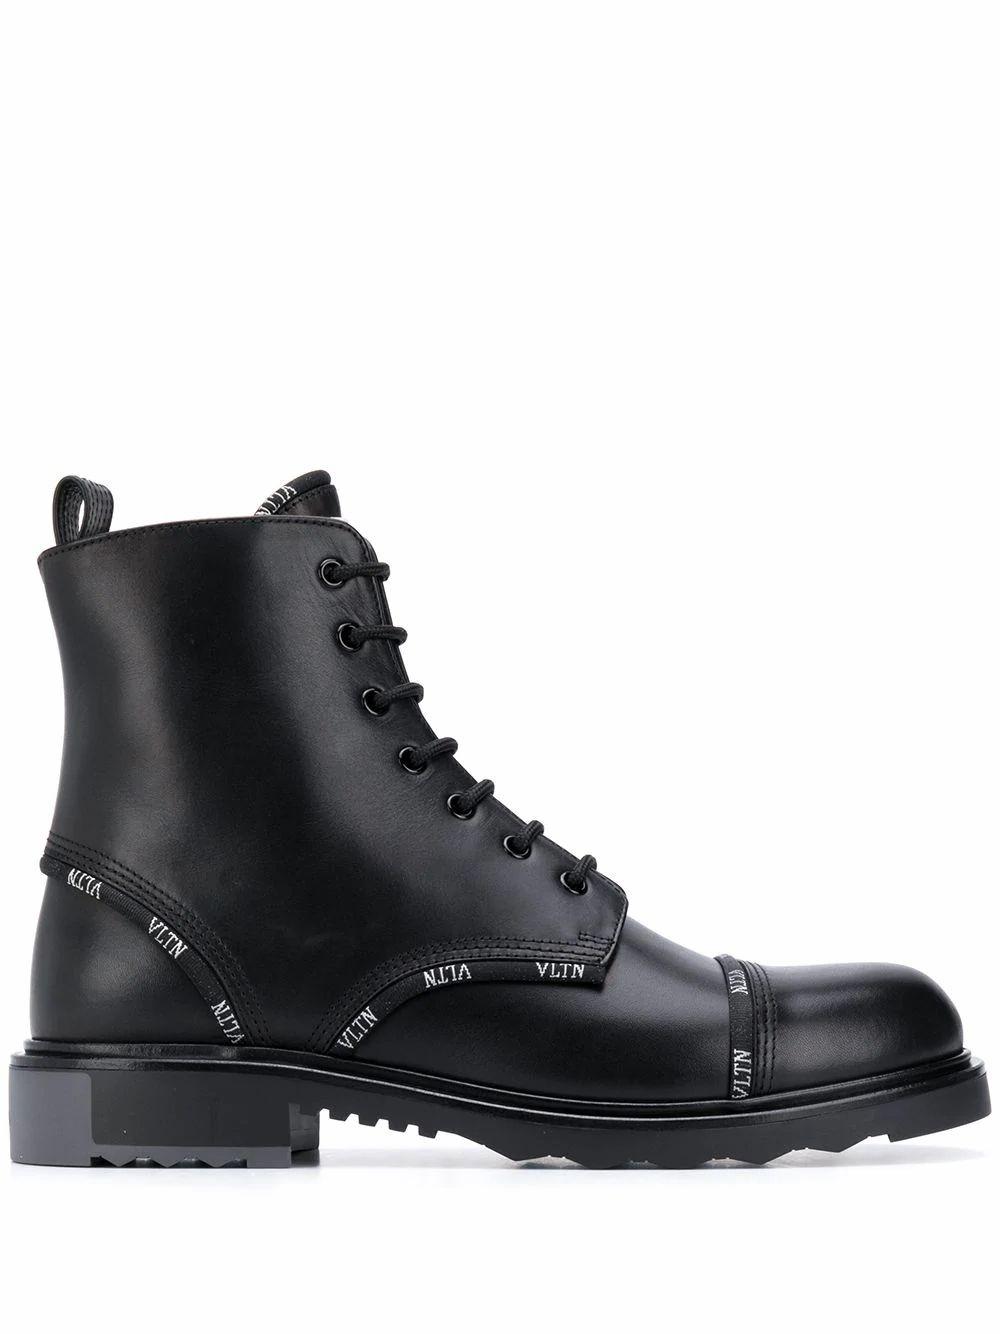 Valentino Garavani Leather Ankle Boots in Black for Men - Lyst